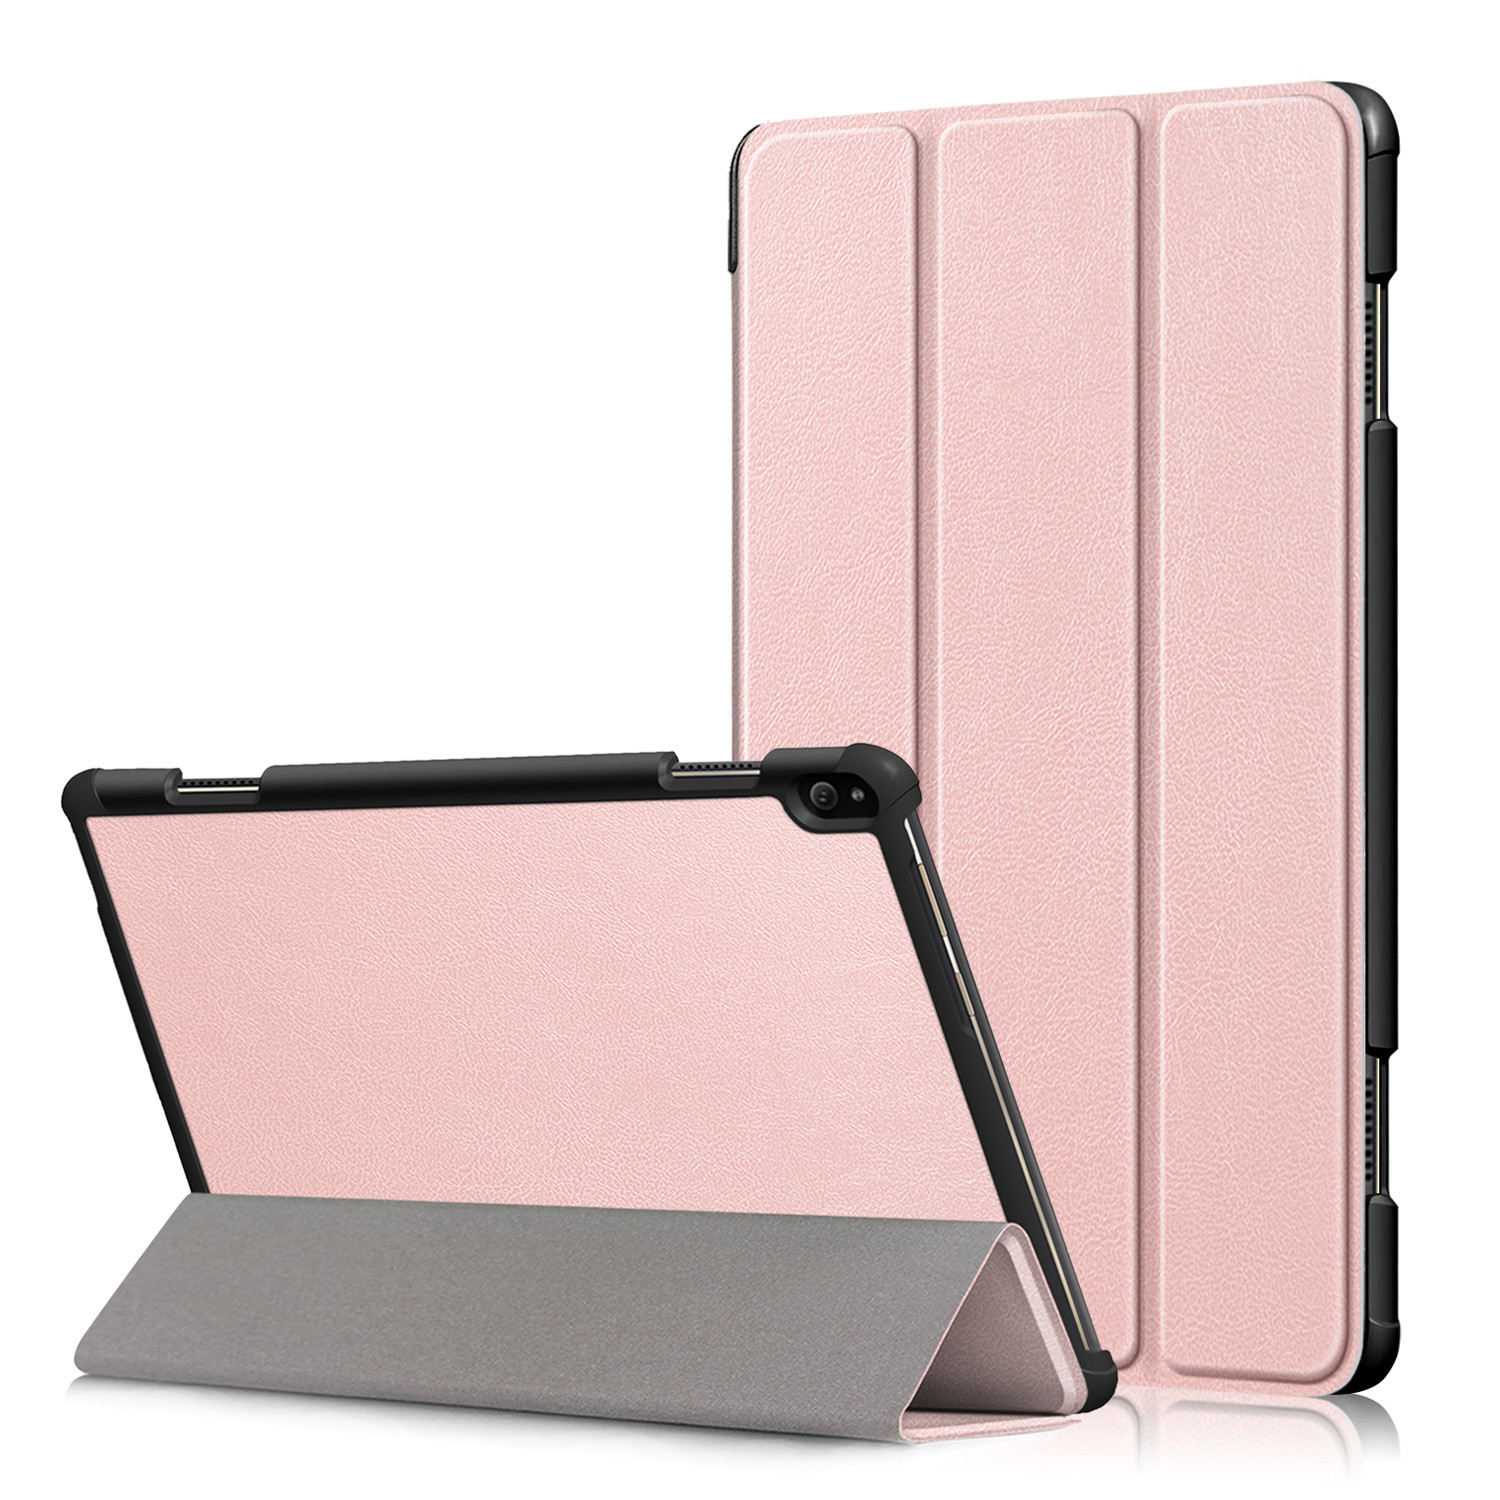 3-Vouw sleepcover hoes - Lenovo Tab P10 - Rose Goud